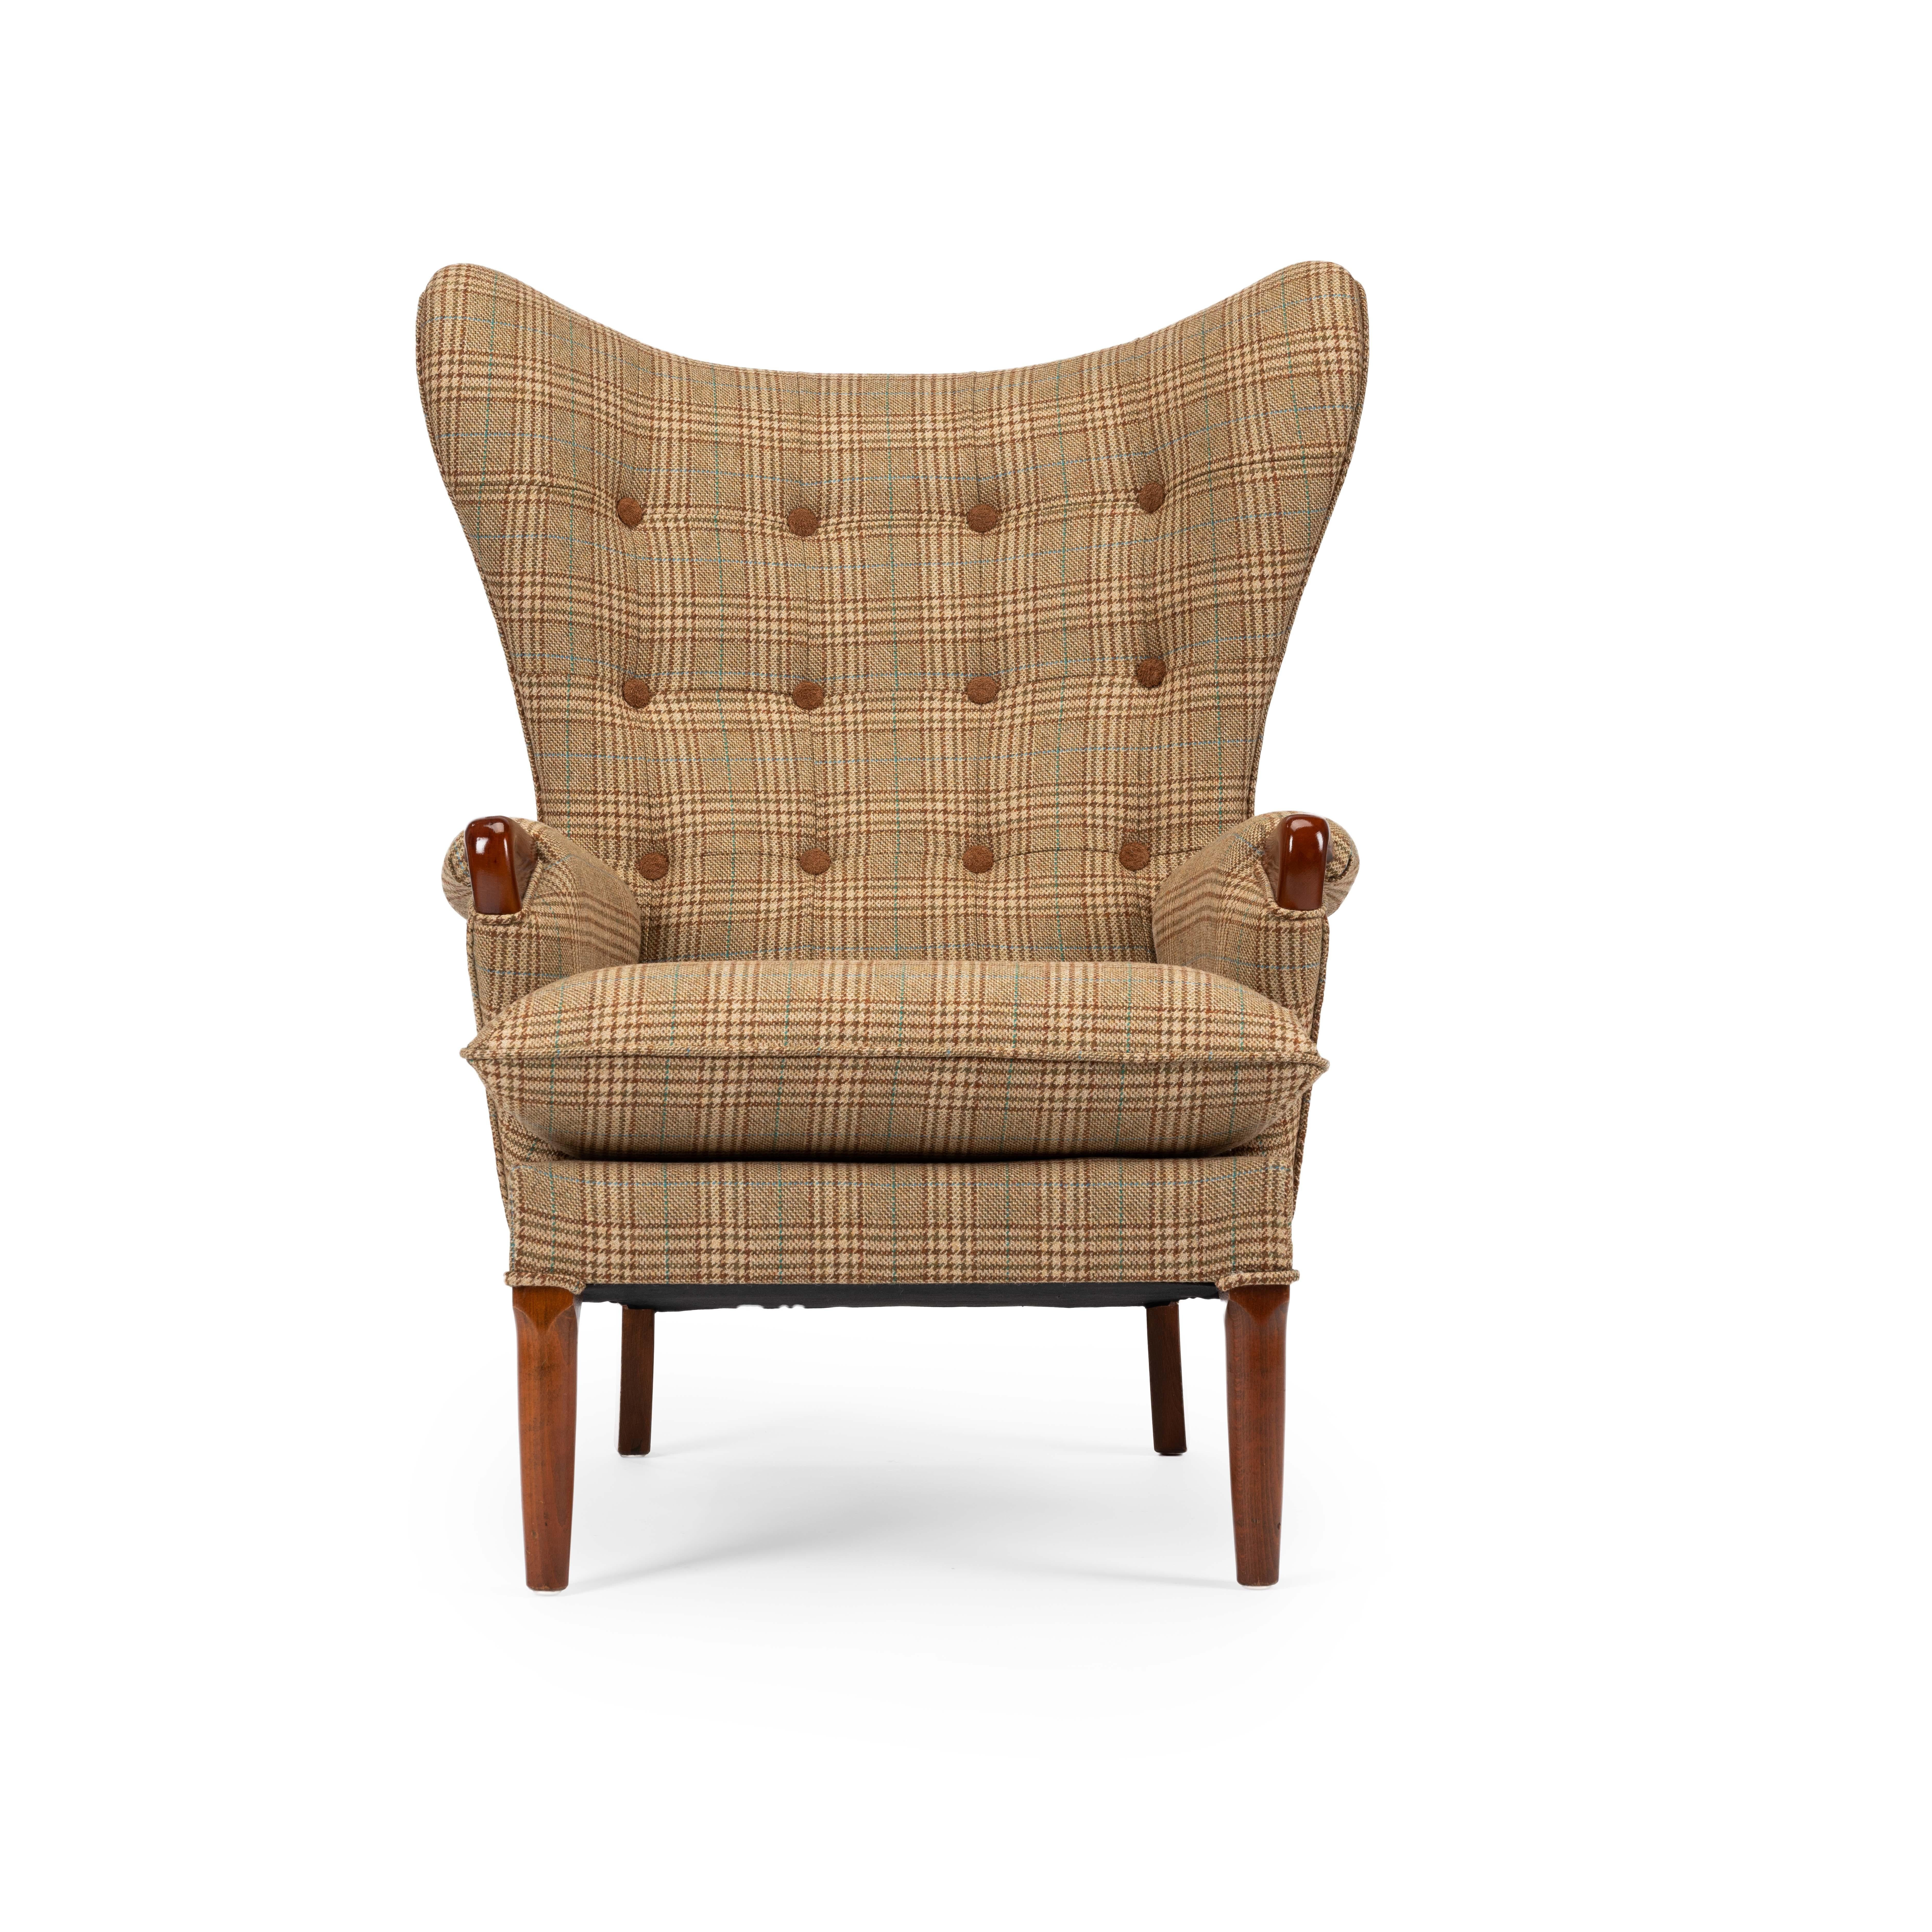 Mahogany Midcentury Vintage Wingback Chairs Reupholstered in Yorkshire Tweed, circa 1960s